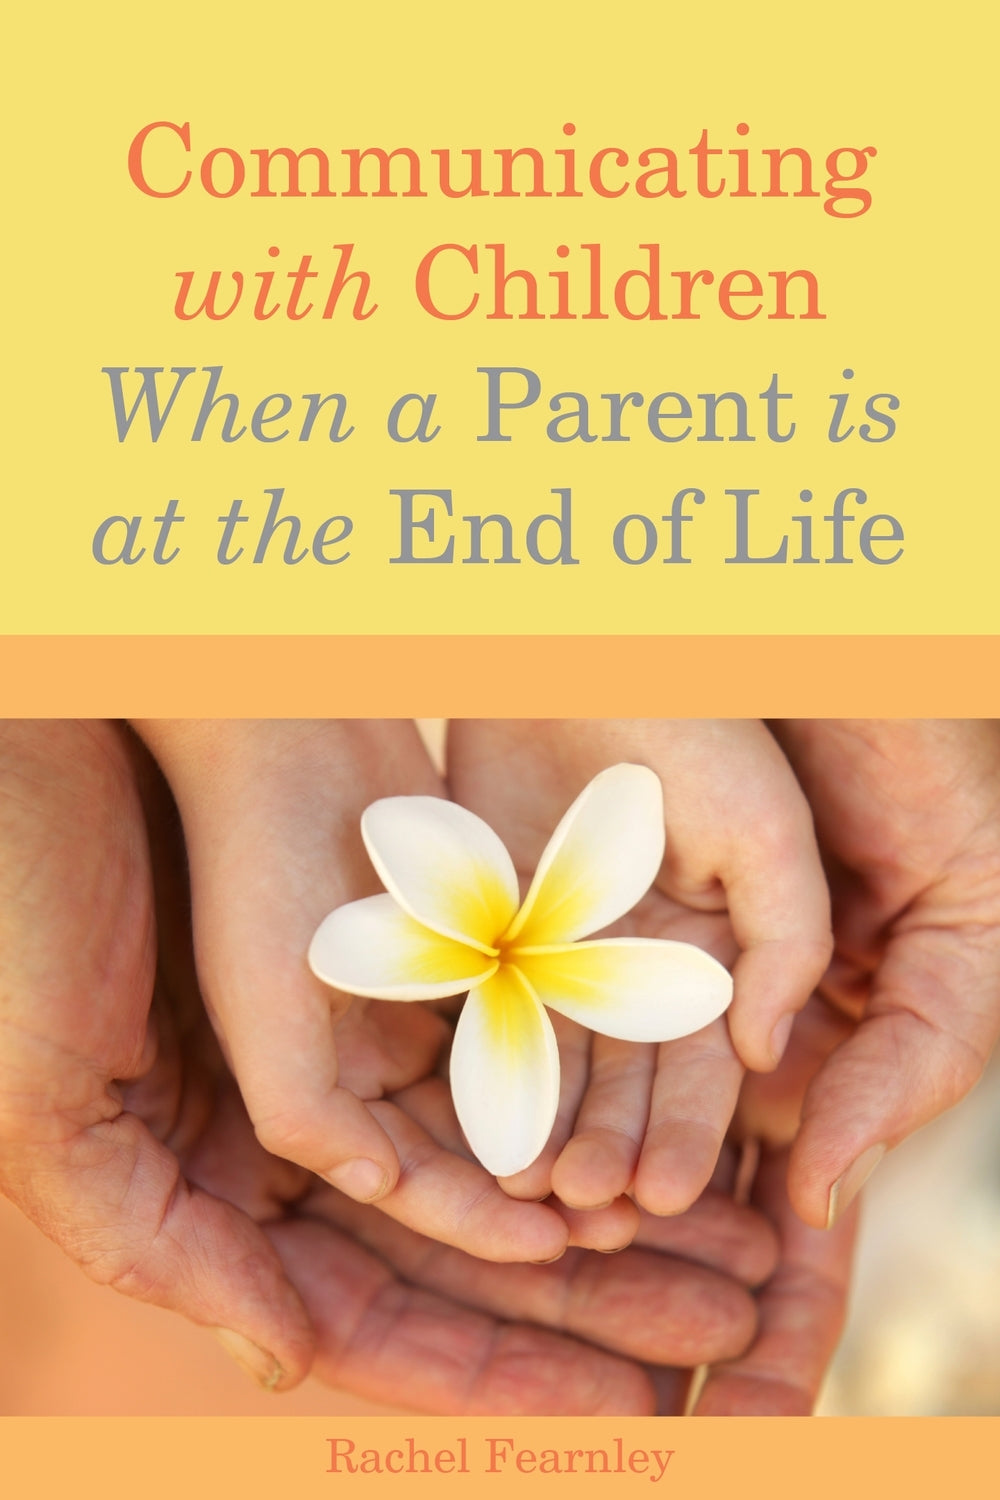 Communicating with Children When a Parent is at the End of Life by Rachel Fearnley